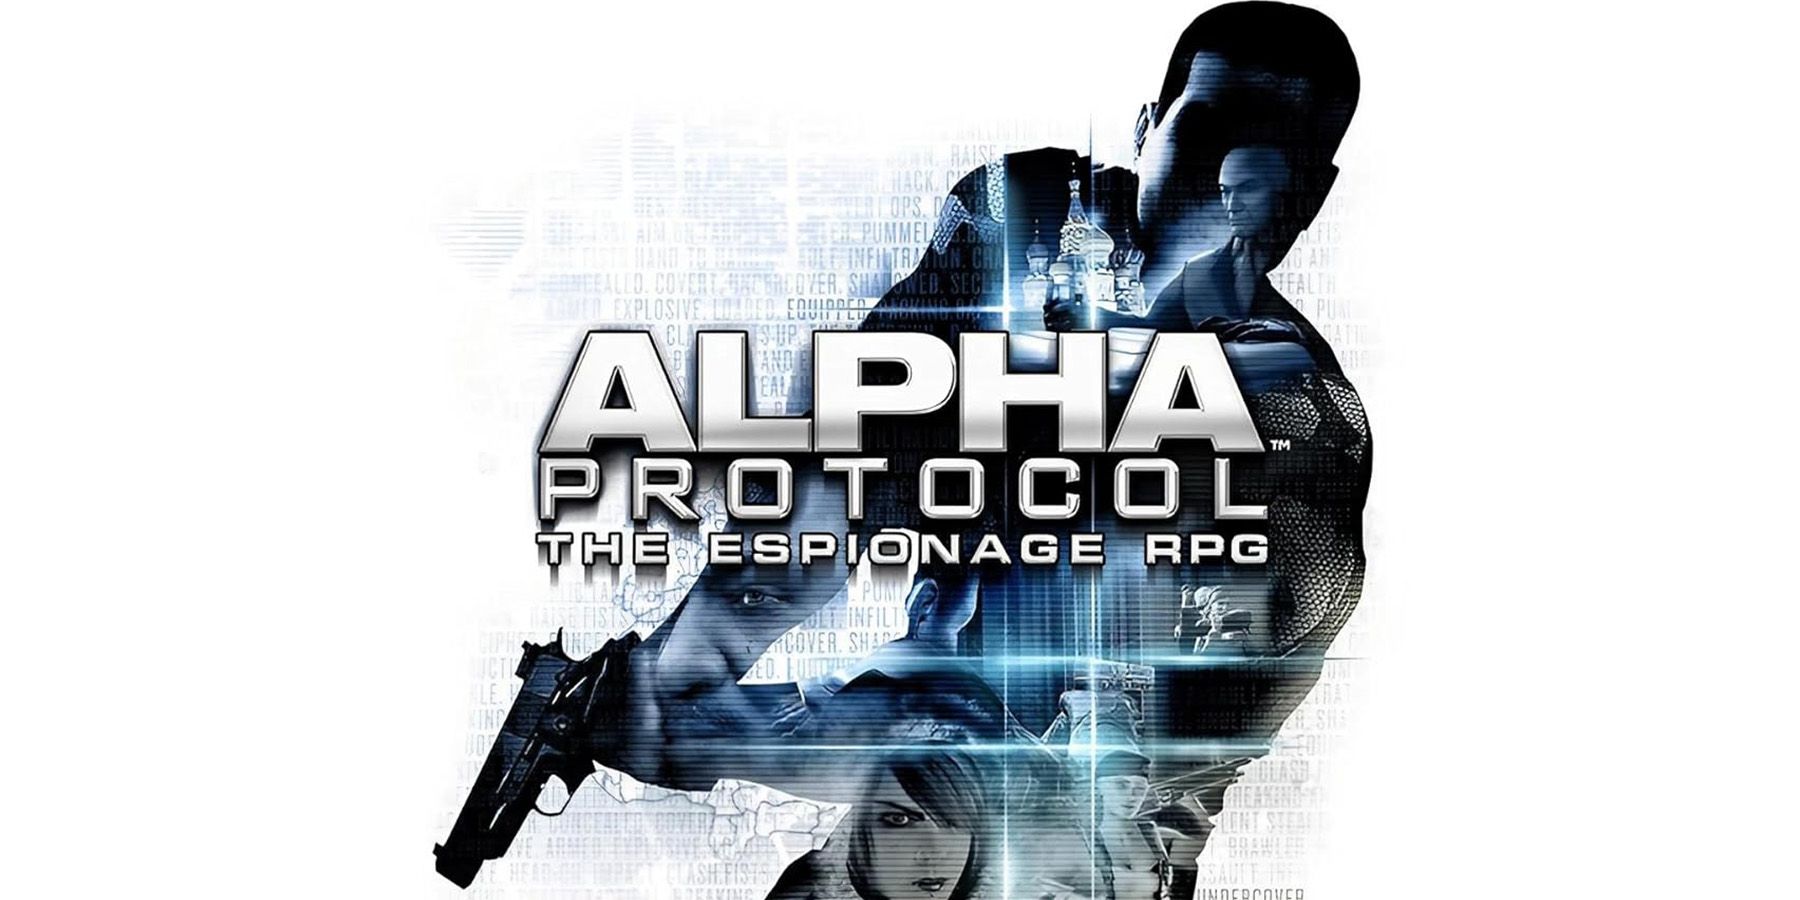 Alpha Protocol The Espionage RPG cover 2x1 crop on white background